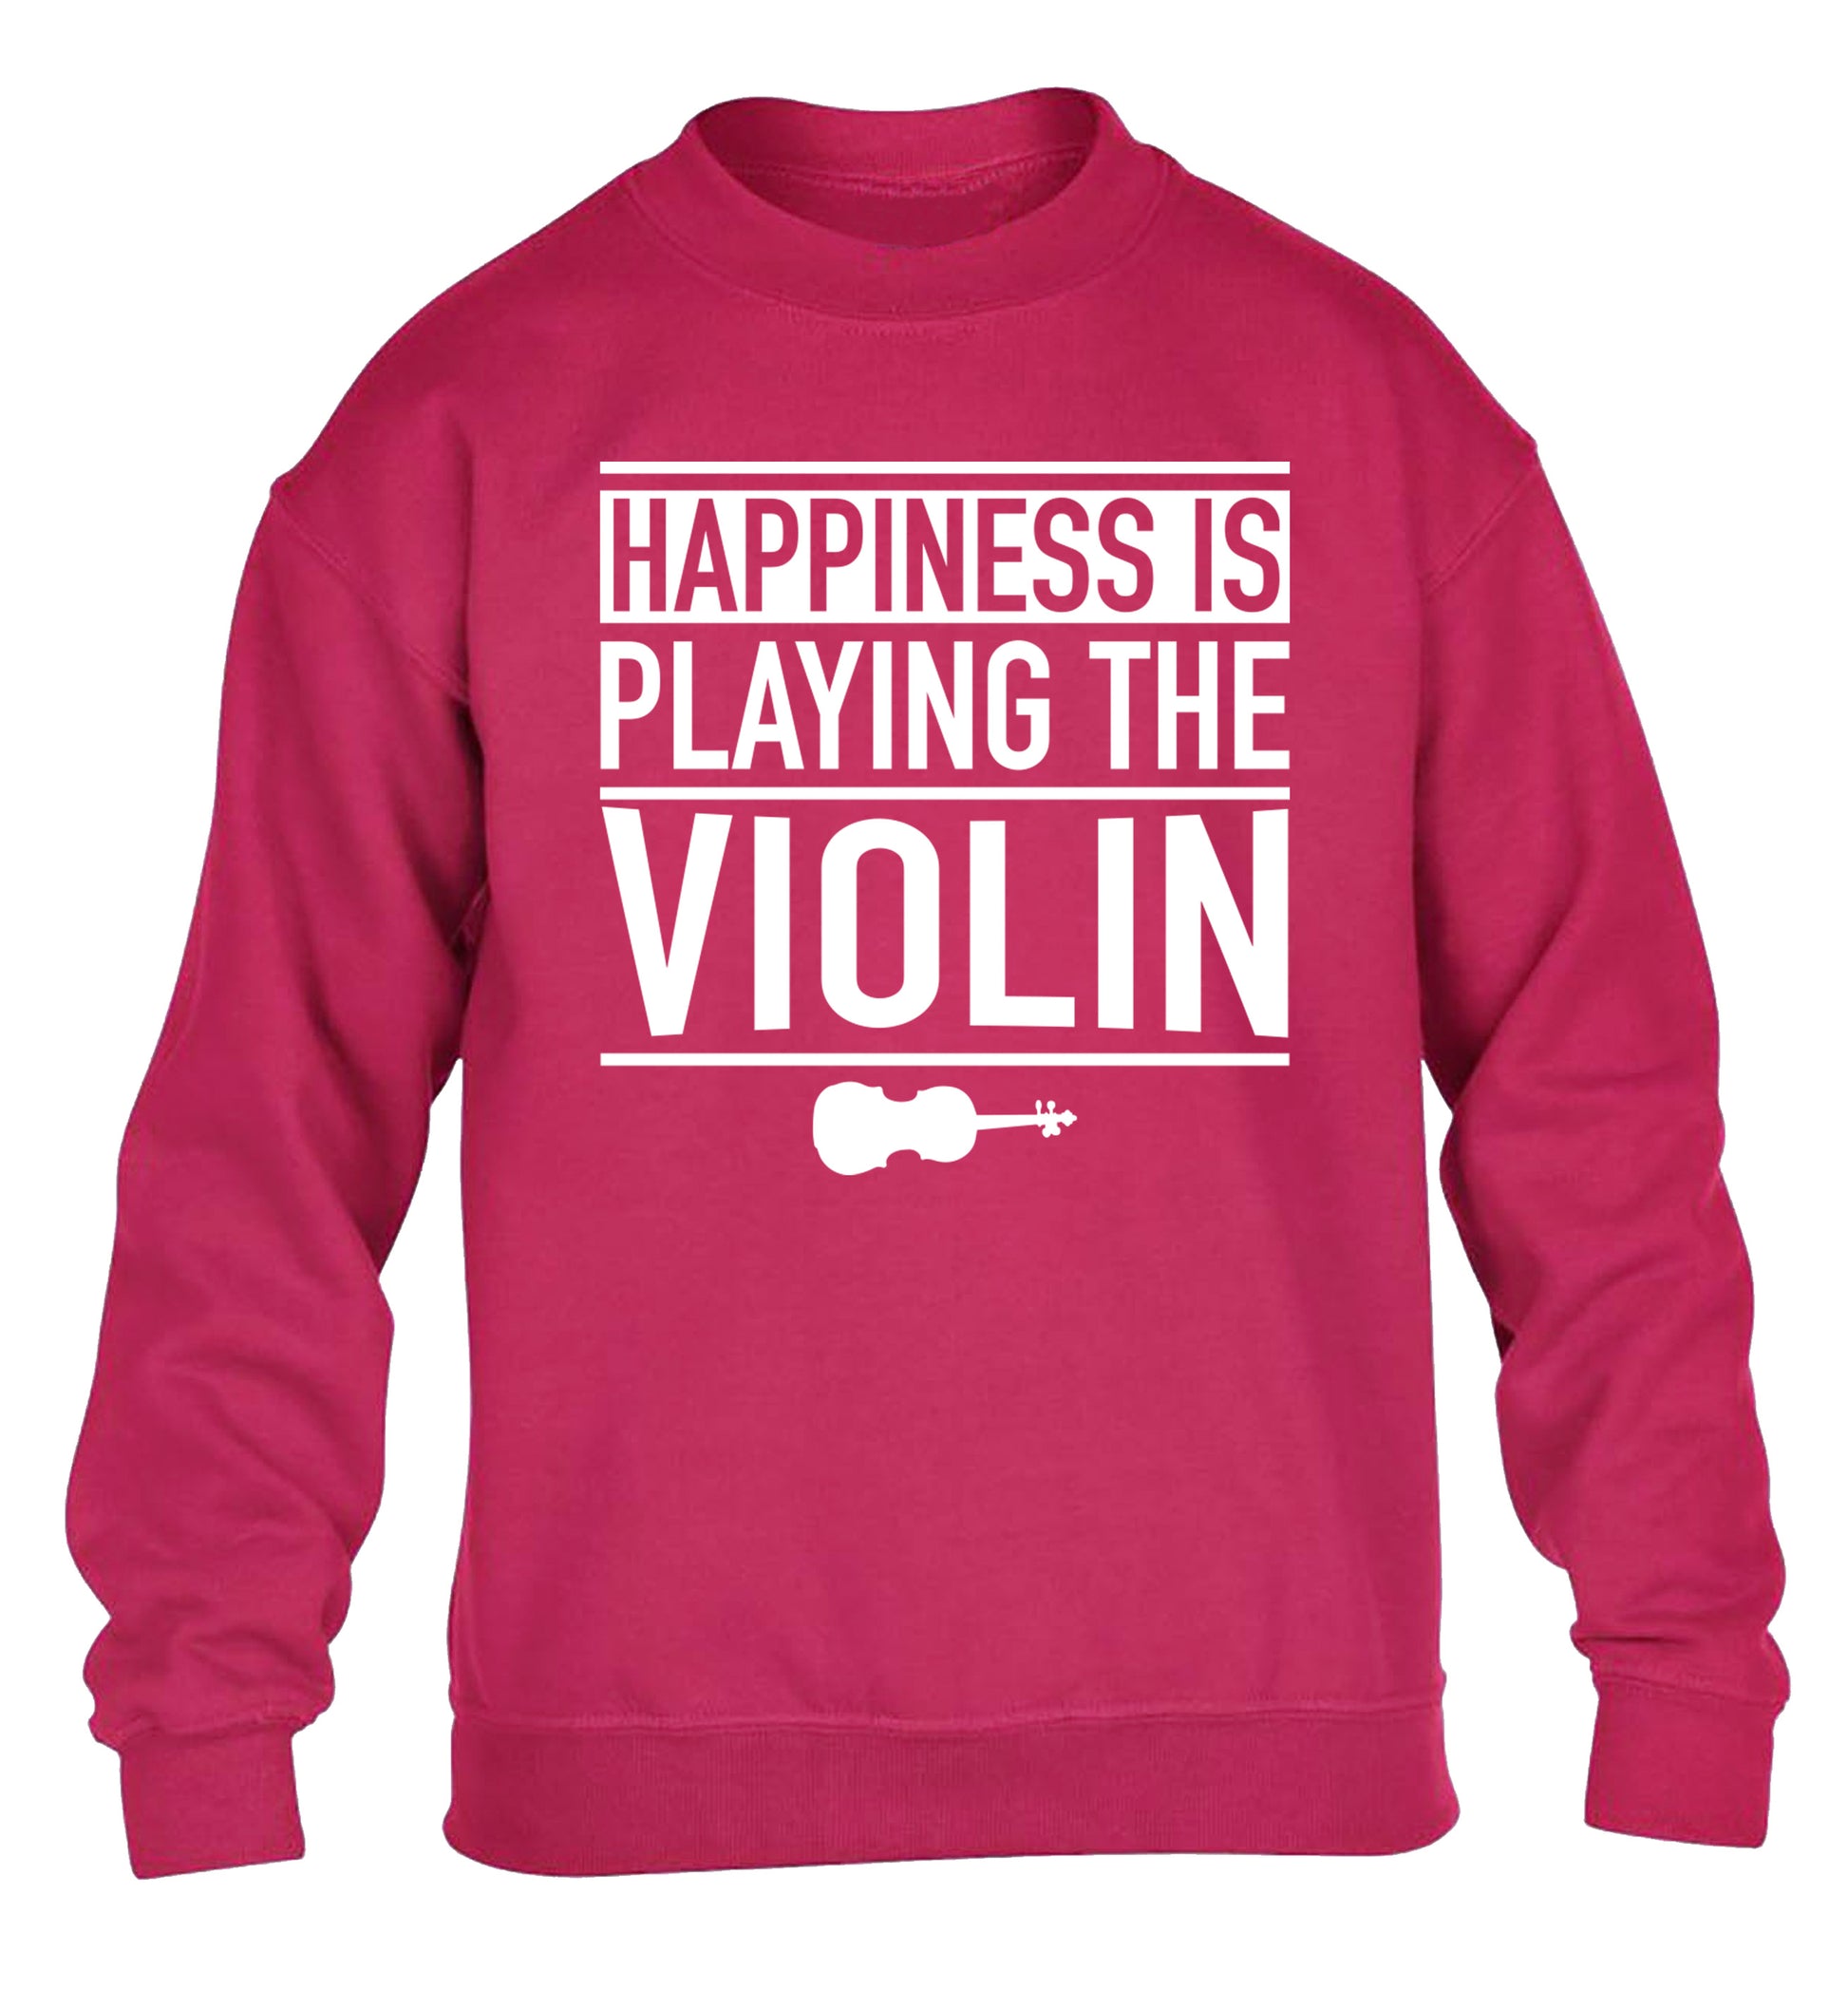 Happiness is playing the violin children's pink sweater 12-13 Years